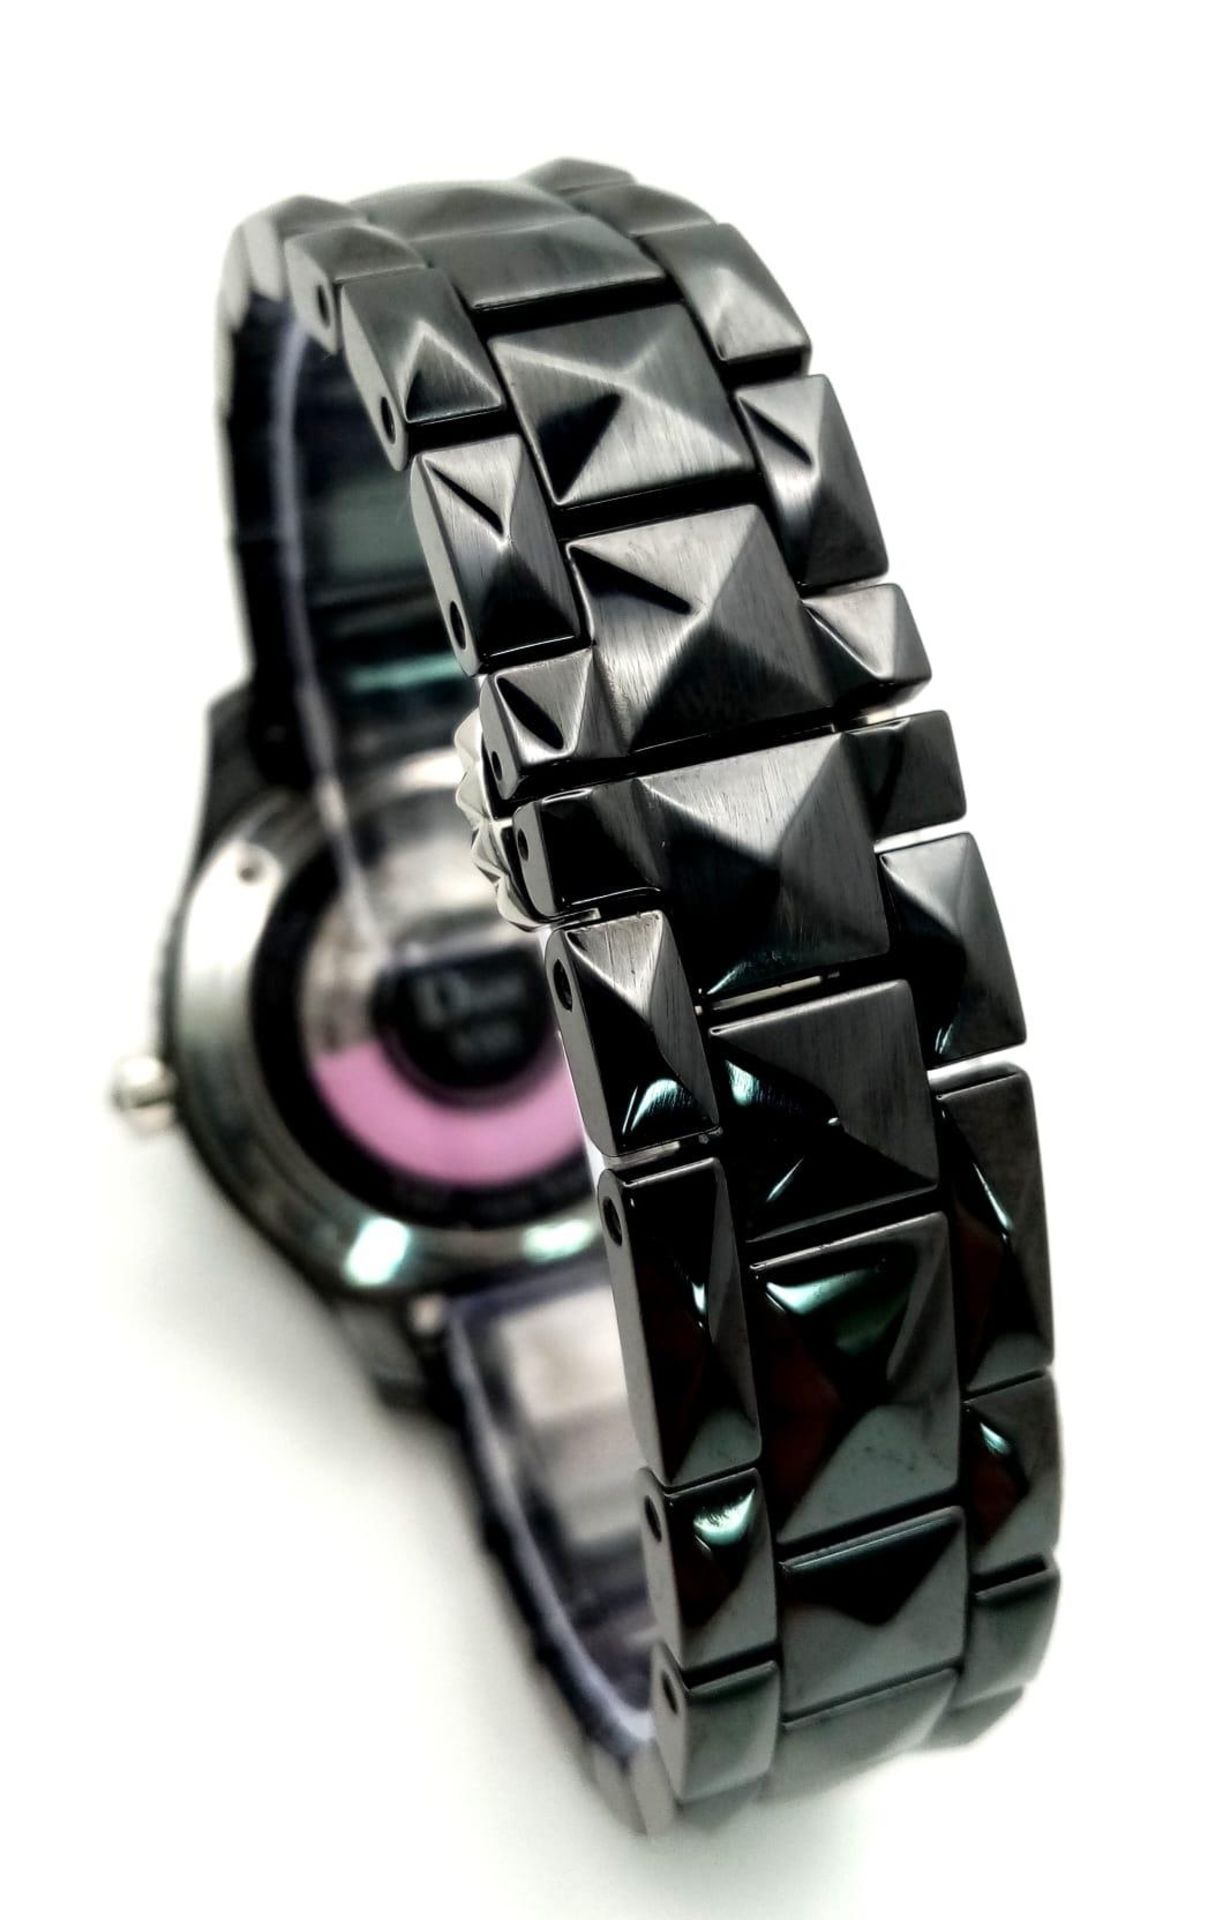 A Christian Dior VIII Automatic Ladies Watch. Black ceramic bracelet and case - 34mm. Black dial - Image 6 of 10